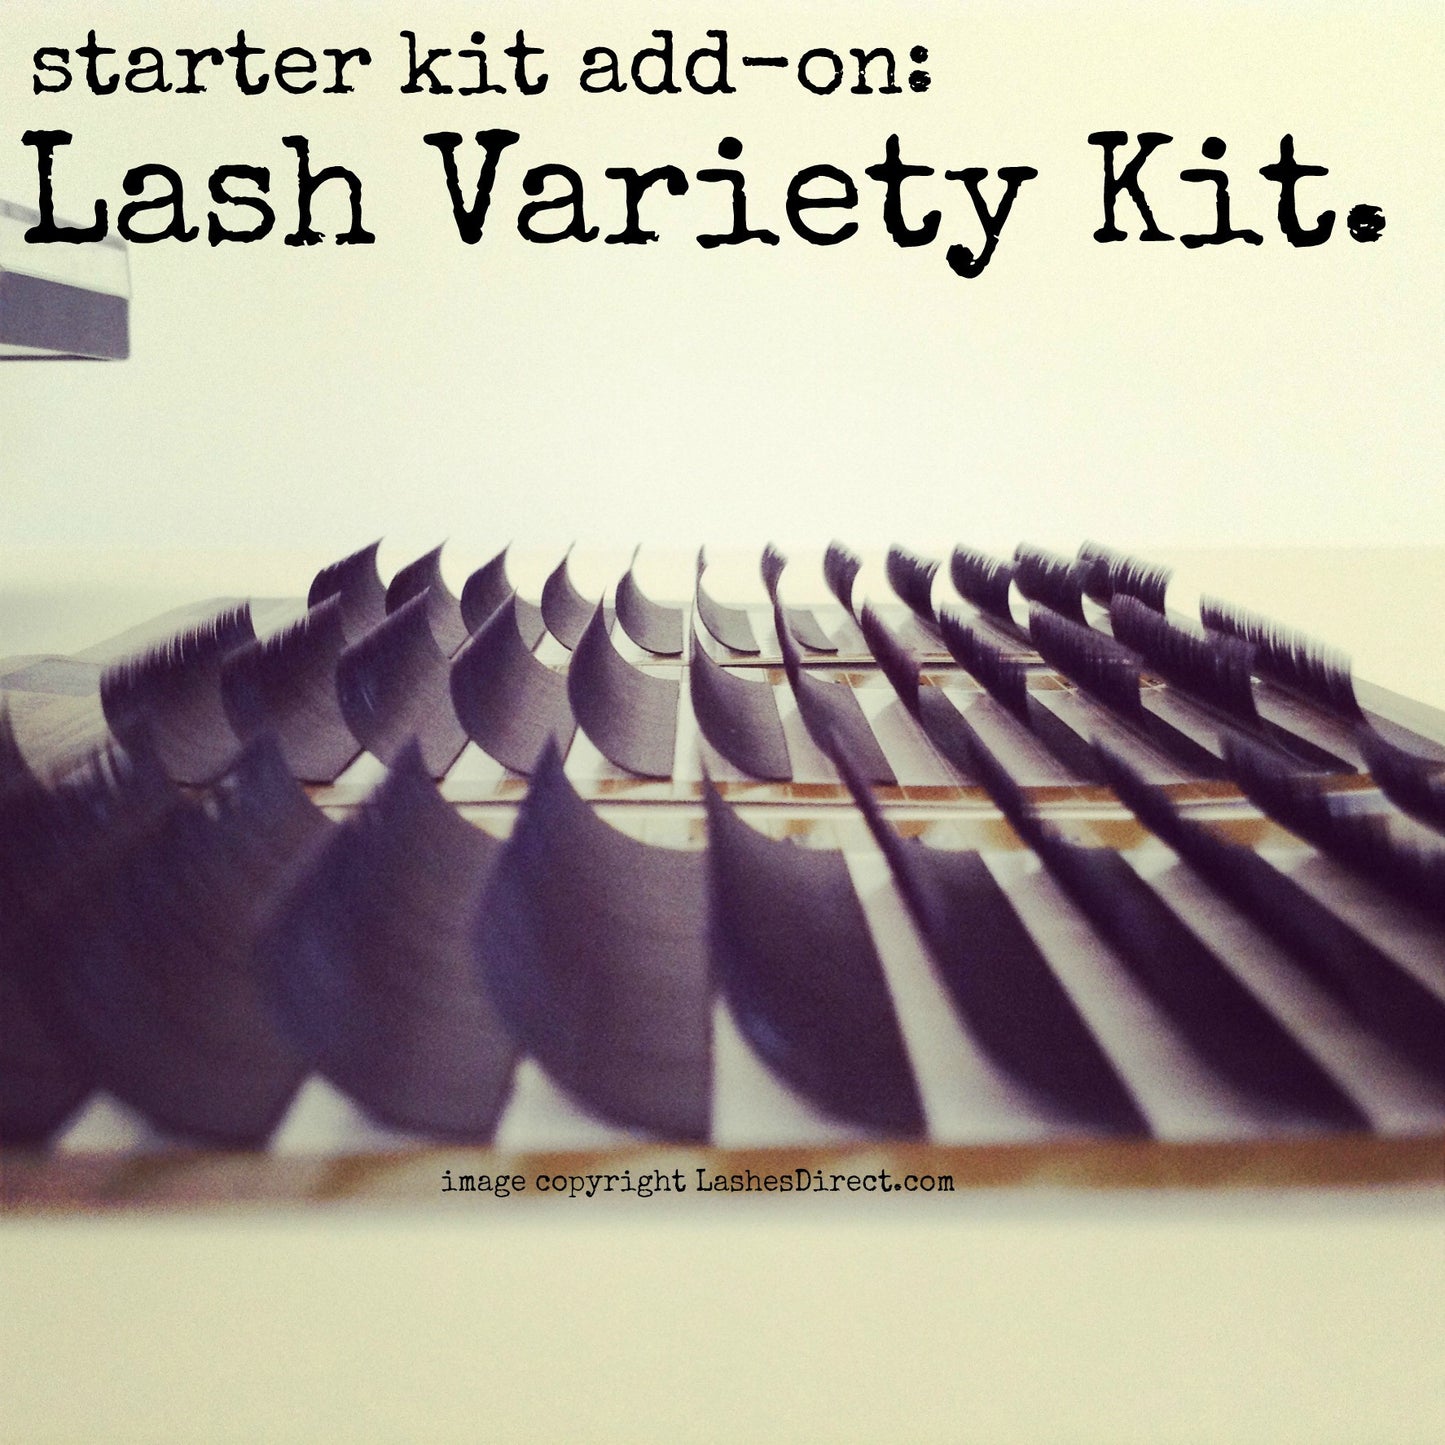 Load image into Gallery viewer, Eyelash Extension Starter Kit: Add on Lash Variety Kit.  Includes additional Lash trays that are not available in Starter Kit
